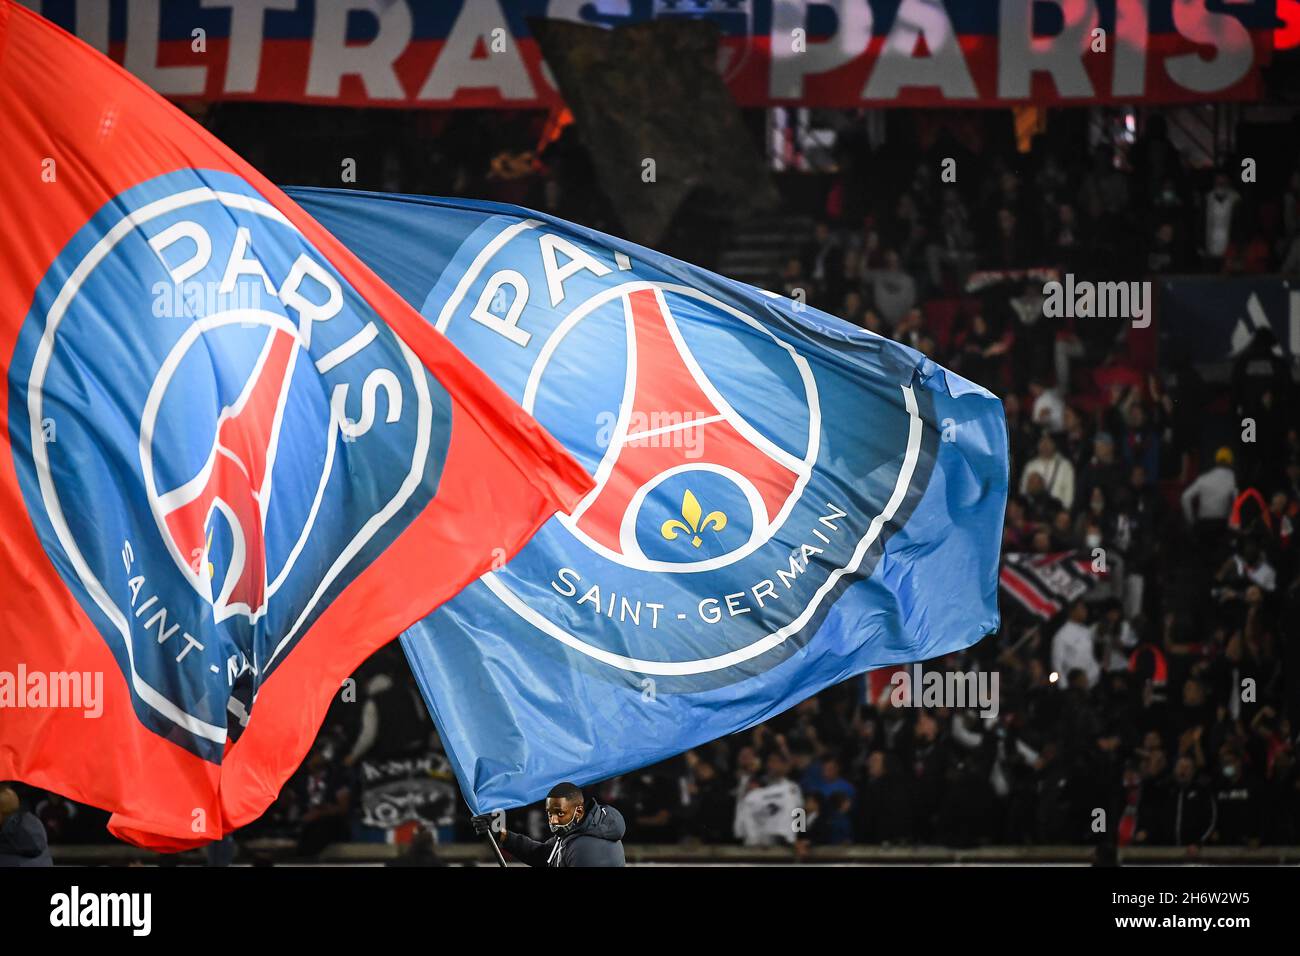 Illustration of the official flags of PSG and supporters during